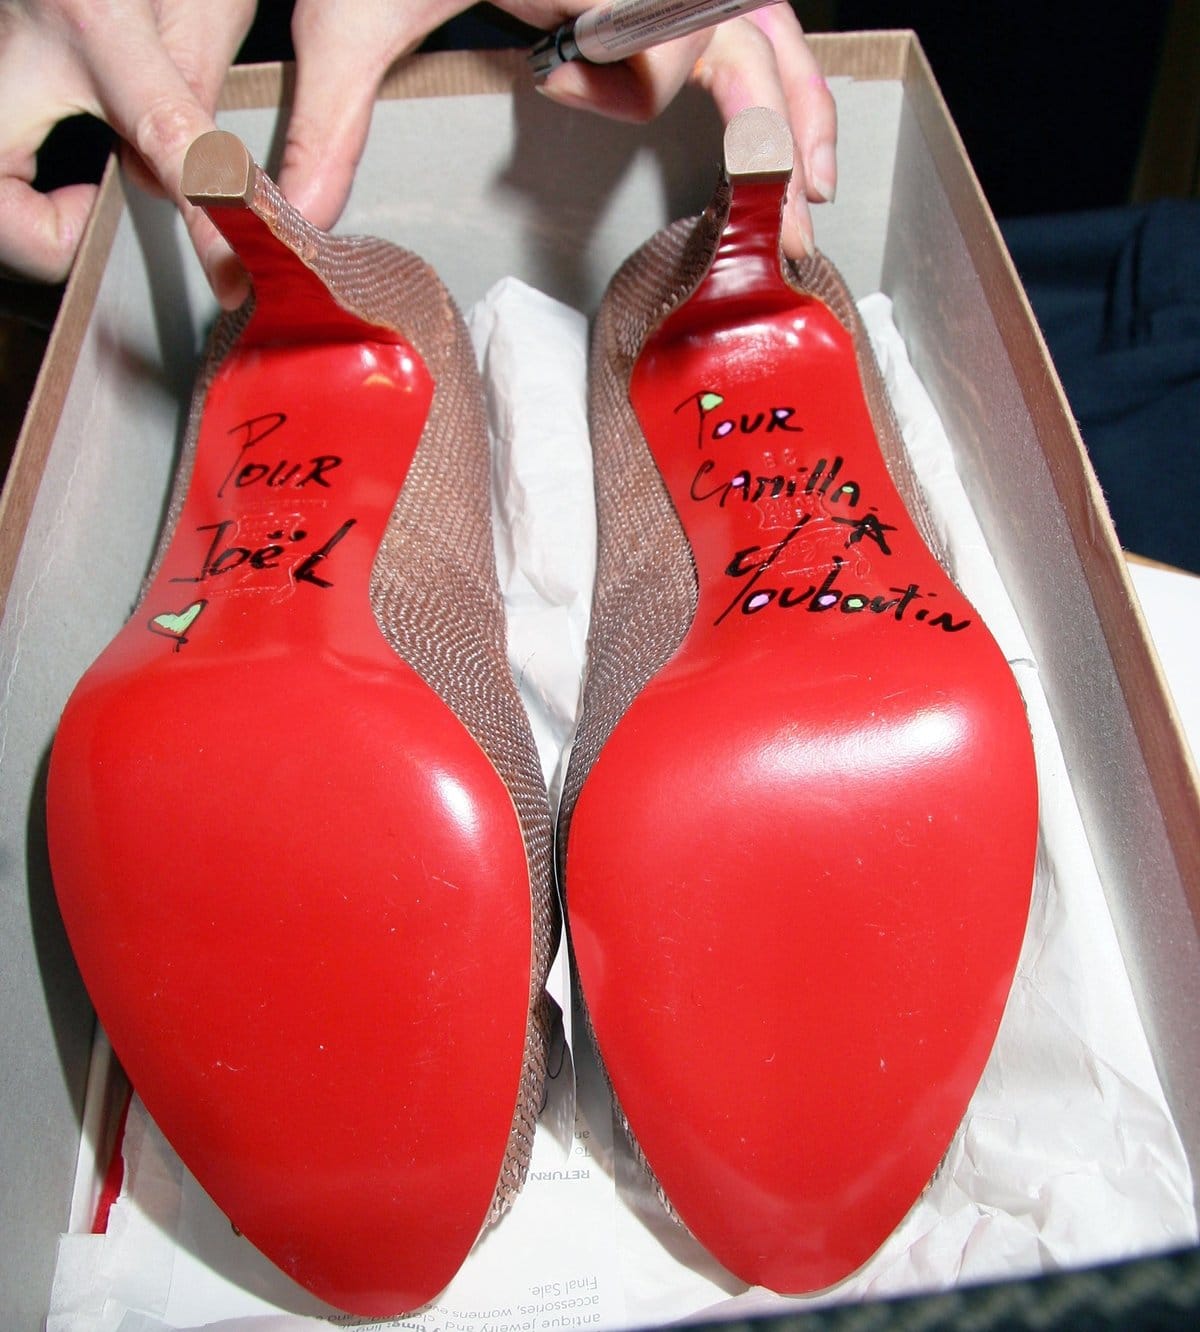 Red sole Christian Louboutin shoes signed by the designer himself